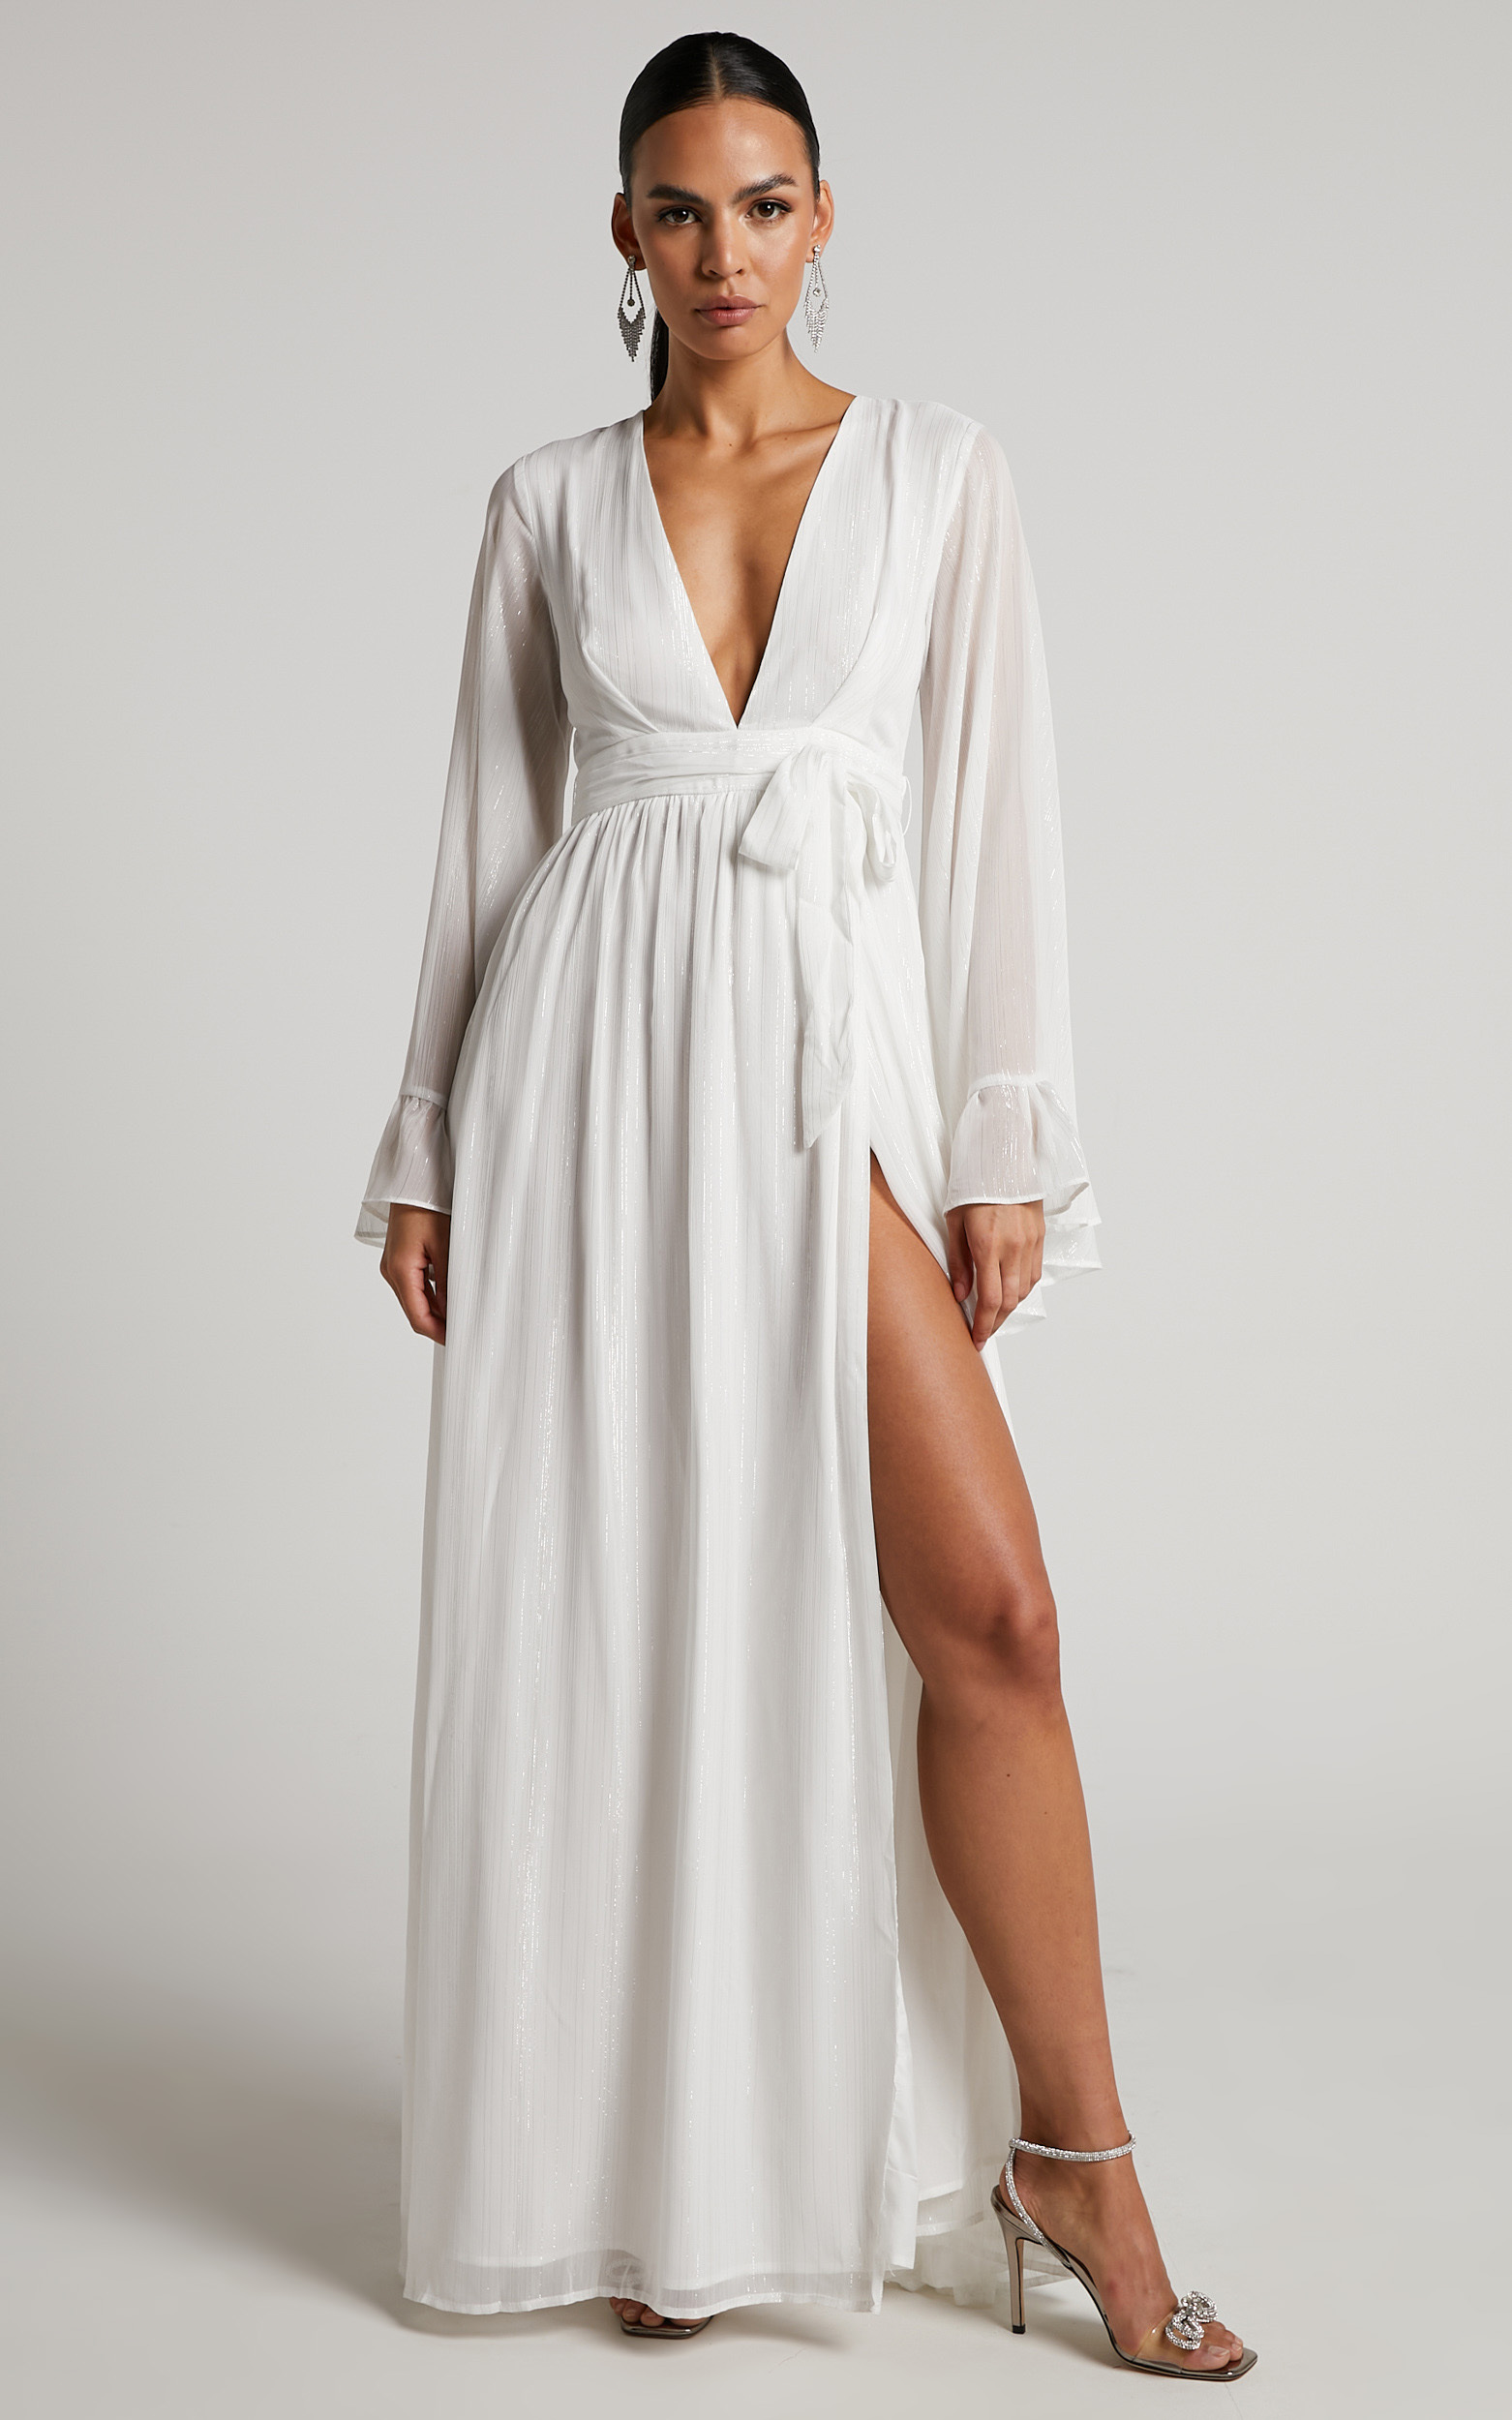 Dangerous Woman Maxi Dress in White - 06, WHT1, hi-res image number null